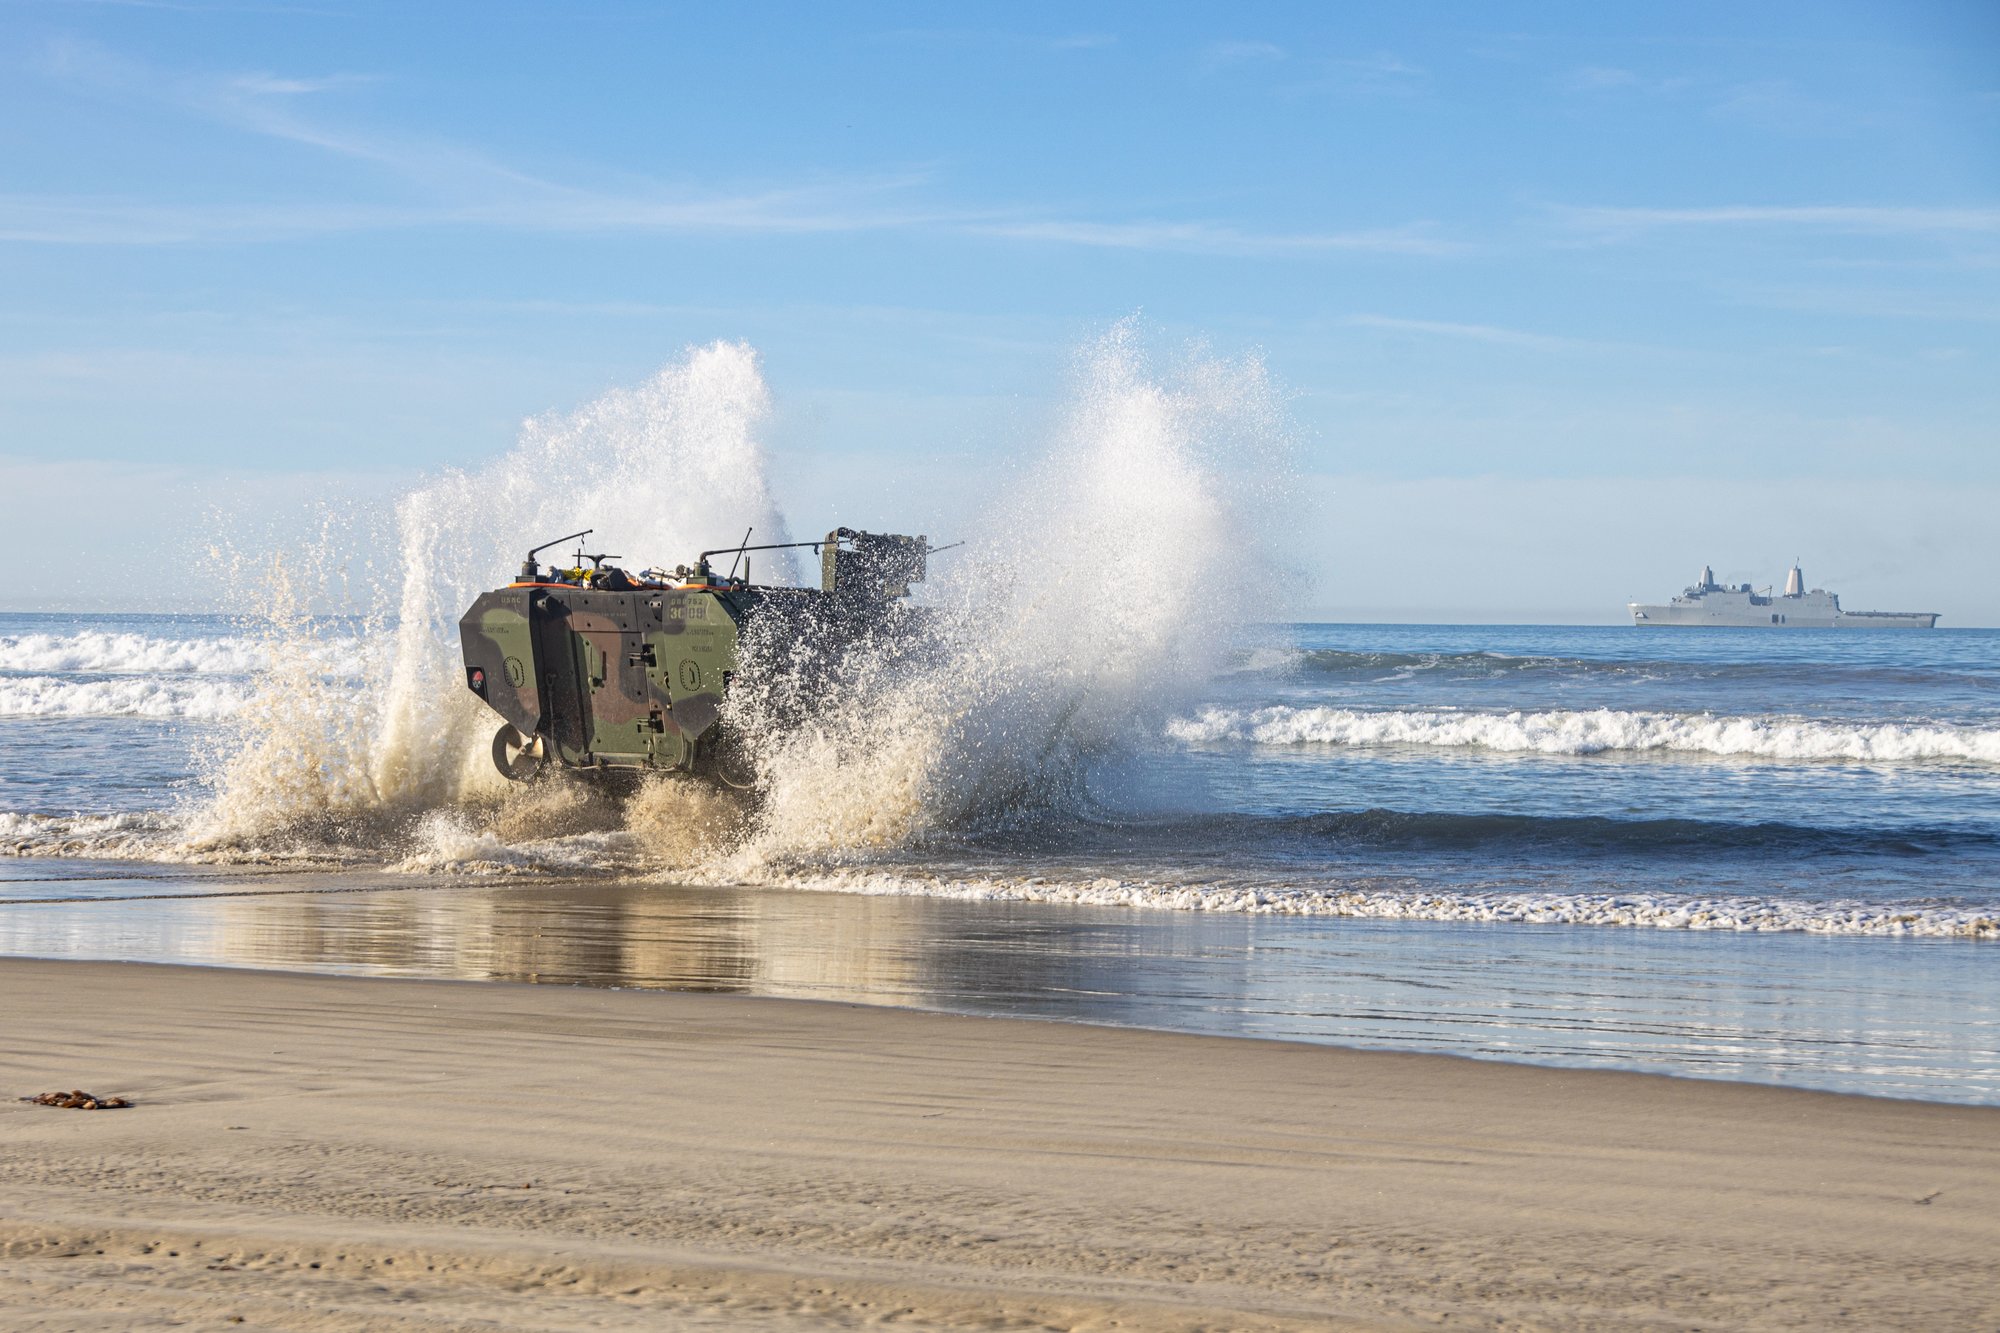 US Marines and sailors assigned to 3d Assault Amphibian Battalion, 1st Marine Division, conduct waterborne training with an Amphibious Combat Vehicle moving from shore to the amphibious transport dock ship Anchorage at Marine Corps Base Camp Pendleton, California, Feb. 12, 2022. US Marine Corps photo by Lance Cpl. Willow Marshall.